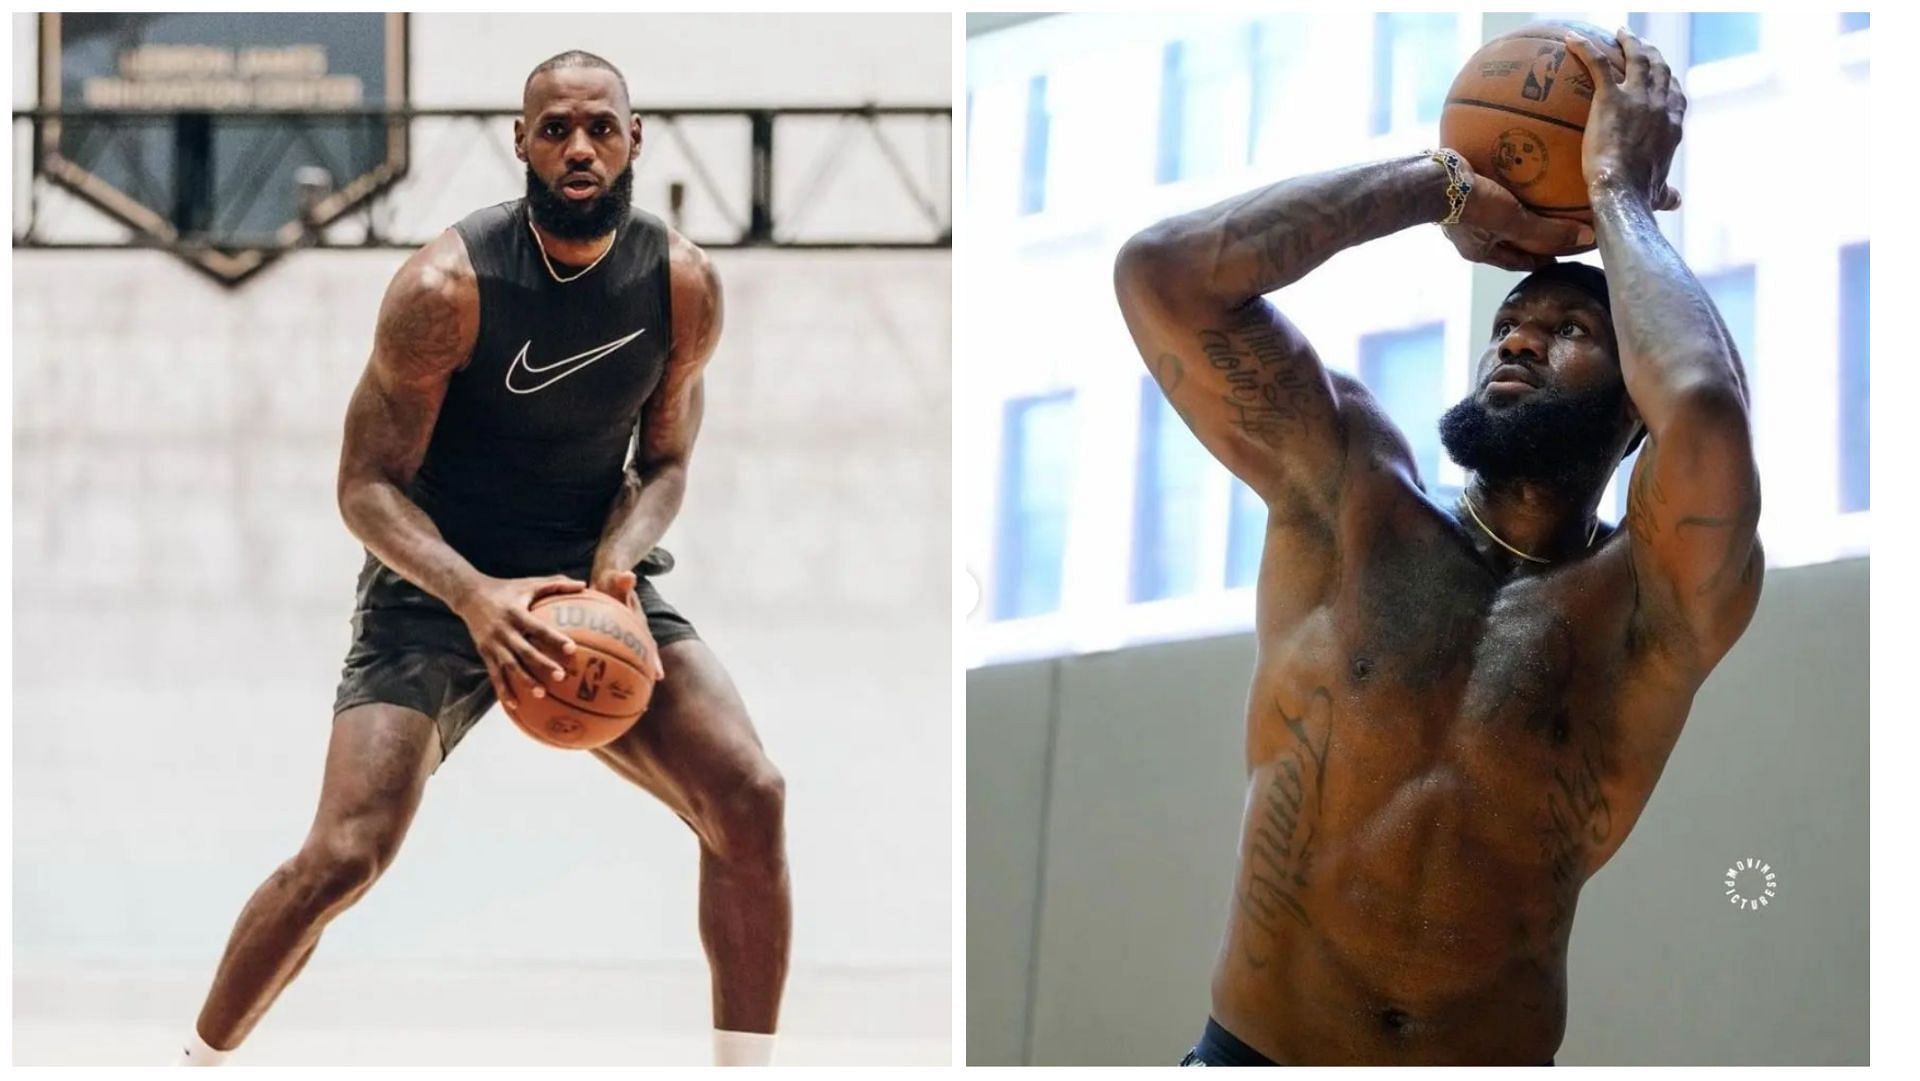 LeBron James' Post-Workout Snack is Not What You'd Expect